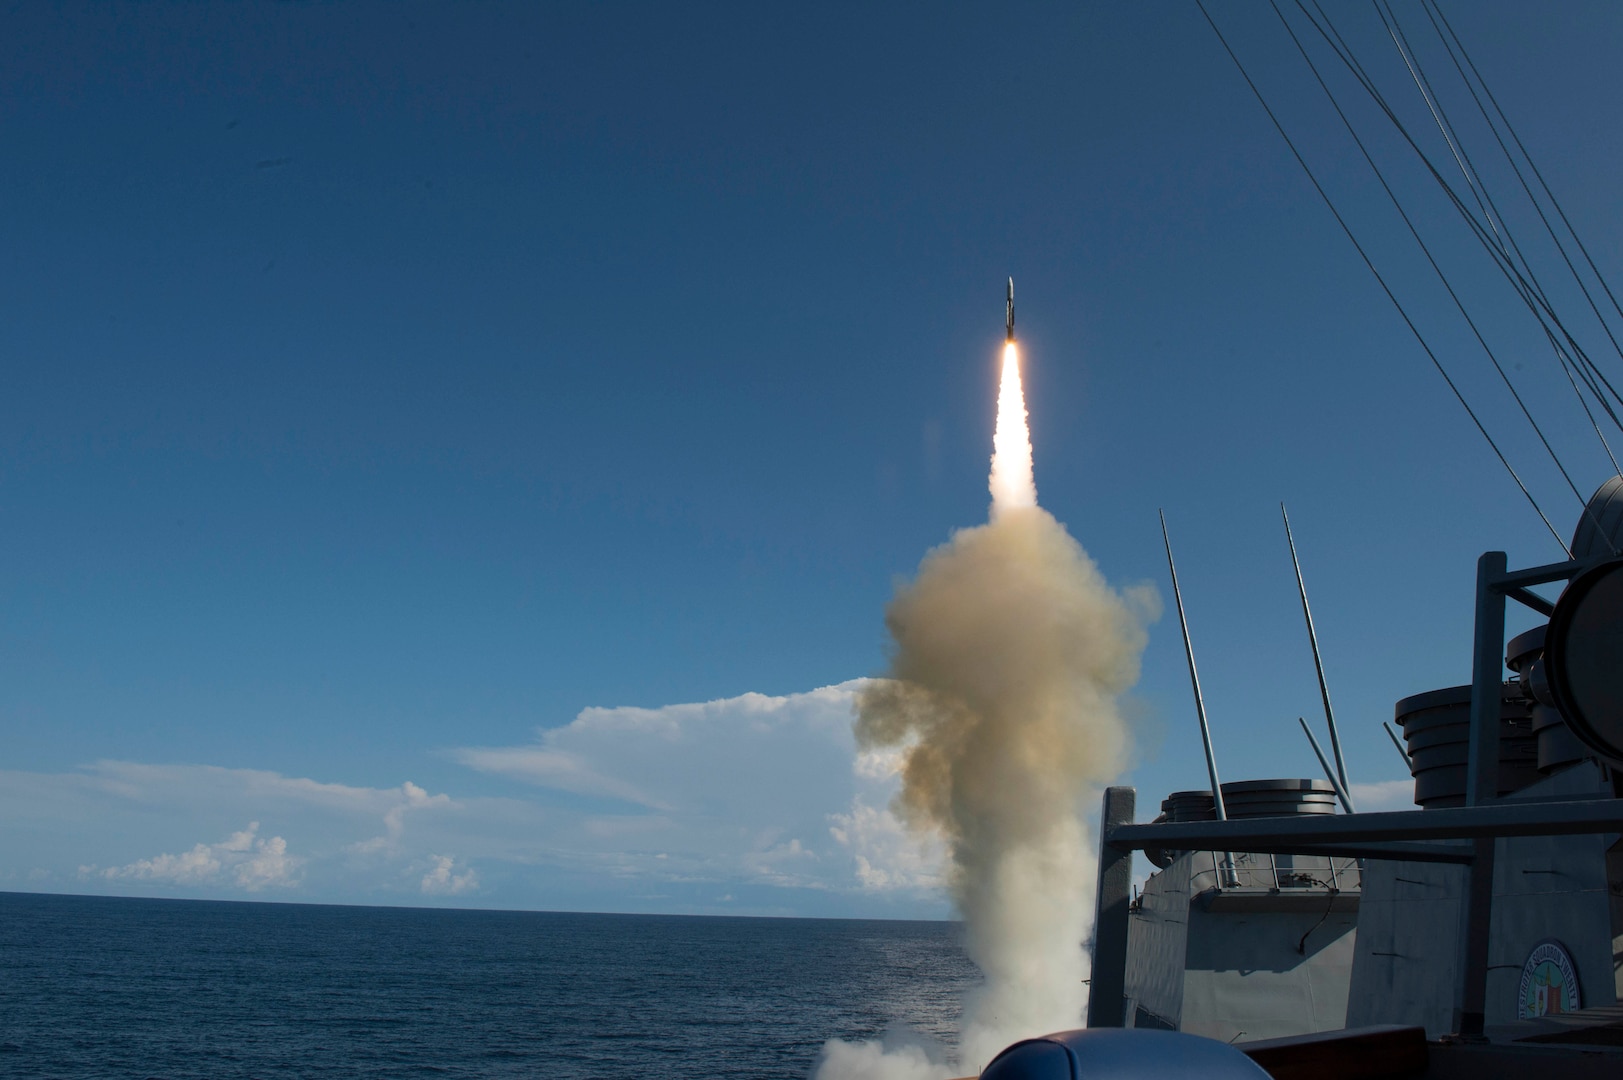 160721-N-BY095-282
ATLANTIC OCEAN (July 21, 2016)
USS Arleigh Burke (DDG 51) successfully launches an SM-2 Standard Missile from the aft Vertical Launching System as part of their Combat System Ship Qualification Trials (CSSQT). The Spanish Navy Ship Cristobol Colon (F-105) and Arleigh Burke are conducting cooperative air defense test exercises including Tactical Data Link interoperability tests of the latest AEGIS Baseline 9.C1 with a foreign ship, as well as the first combined Combat Systems Ship Qualification Trial with the Spanish Navy since 2007. These types of cooperative events with our allies and partners deepen our operational relationships, making us collectively stronger and better postured to face new and emerging challenges. (U.S. Navy photo/Released)
